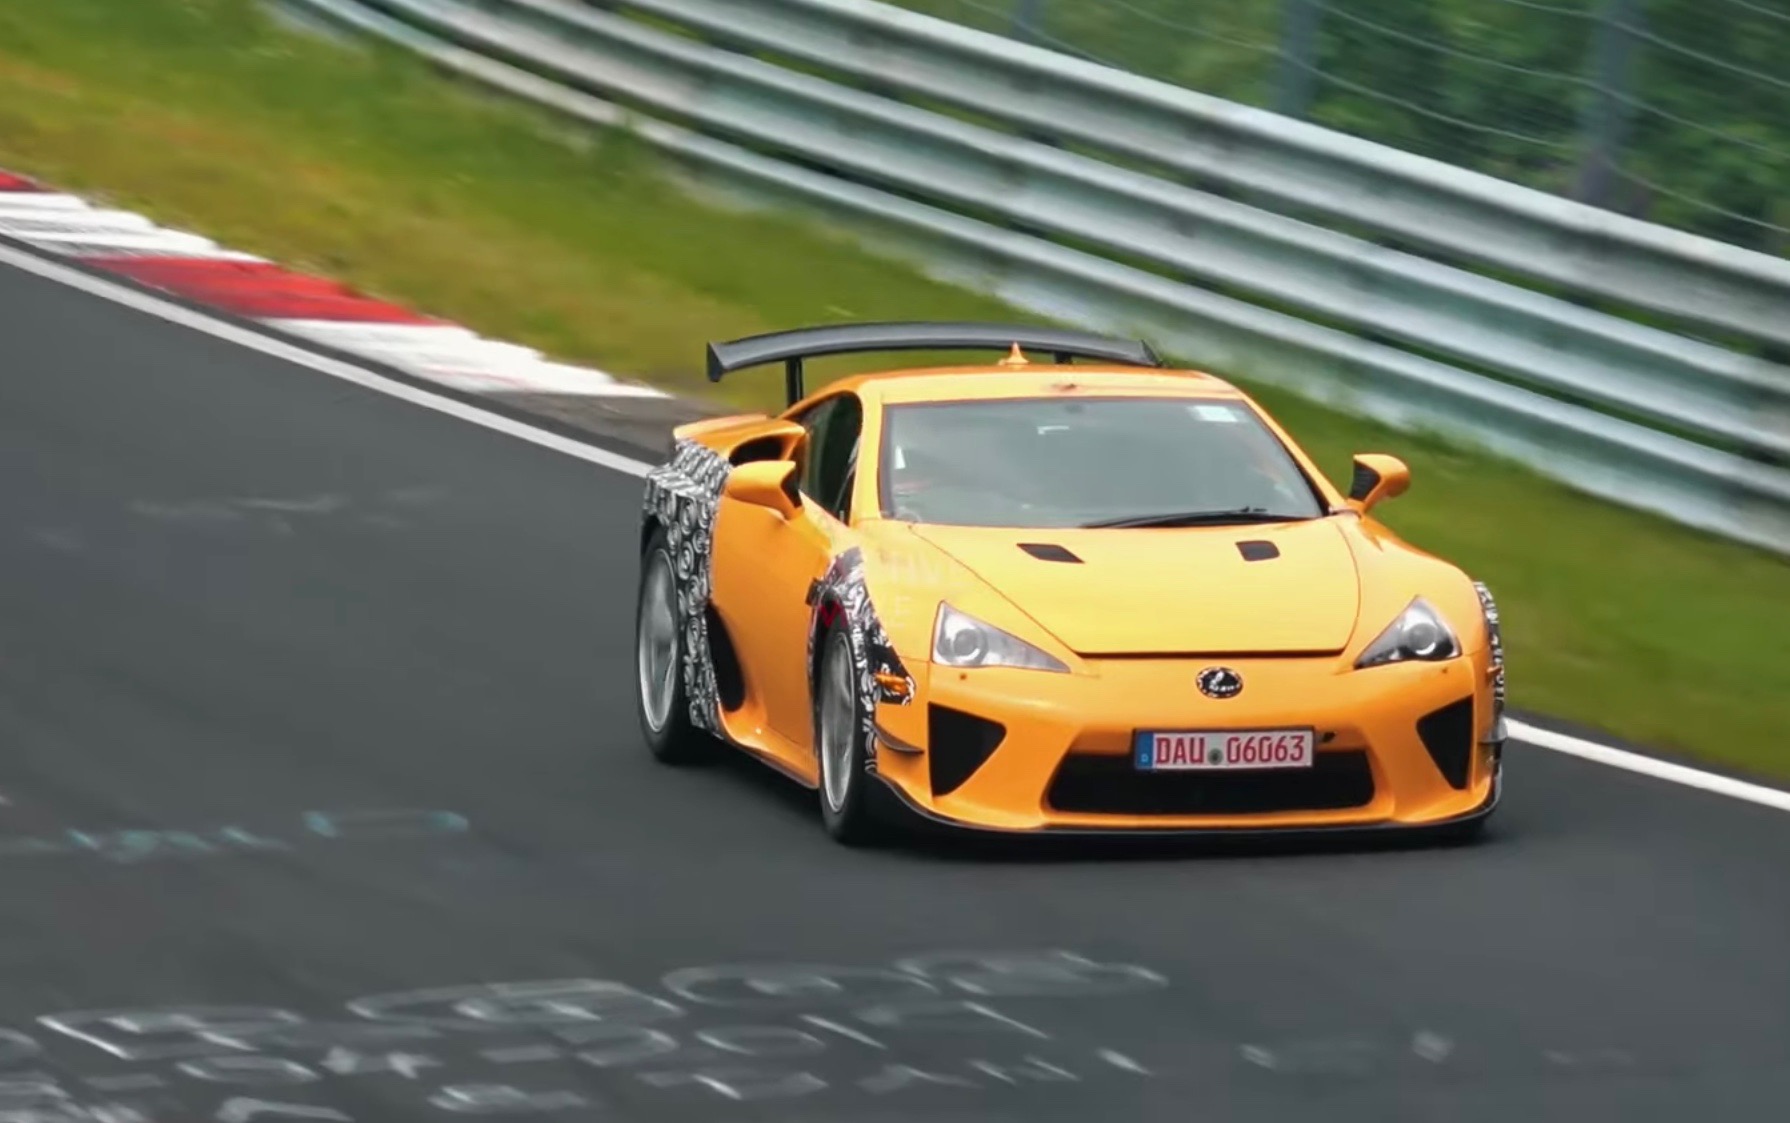 Lexus LC F potentially spotted using V10 LFA as test mule (video)